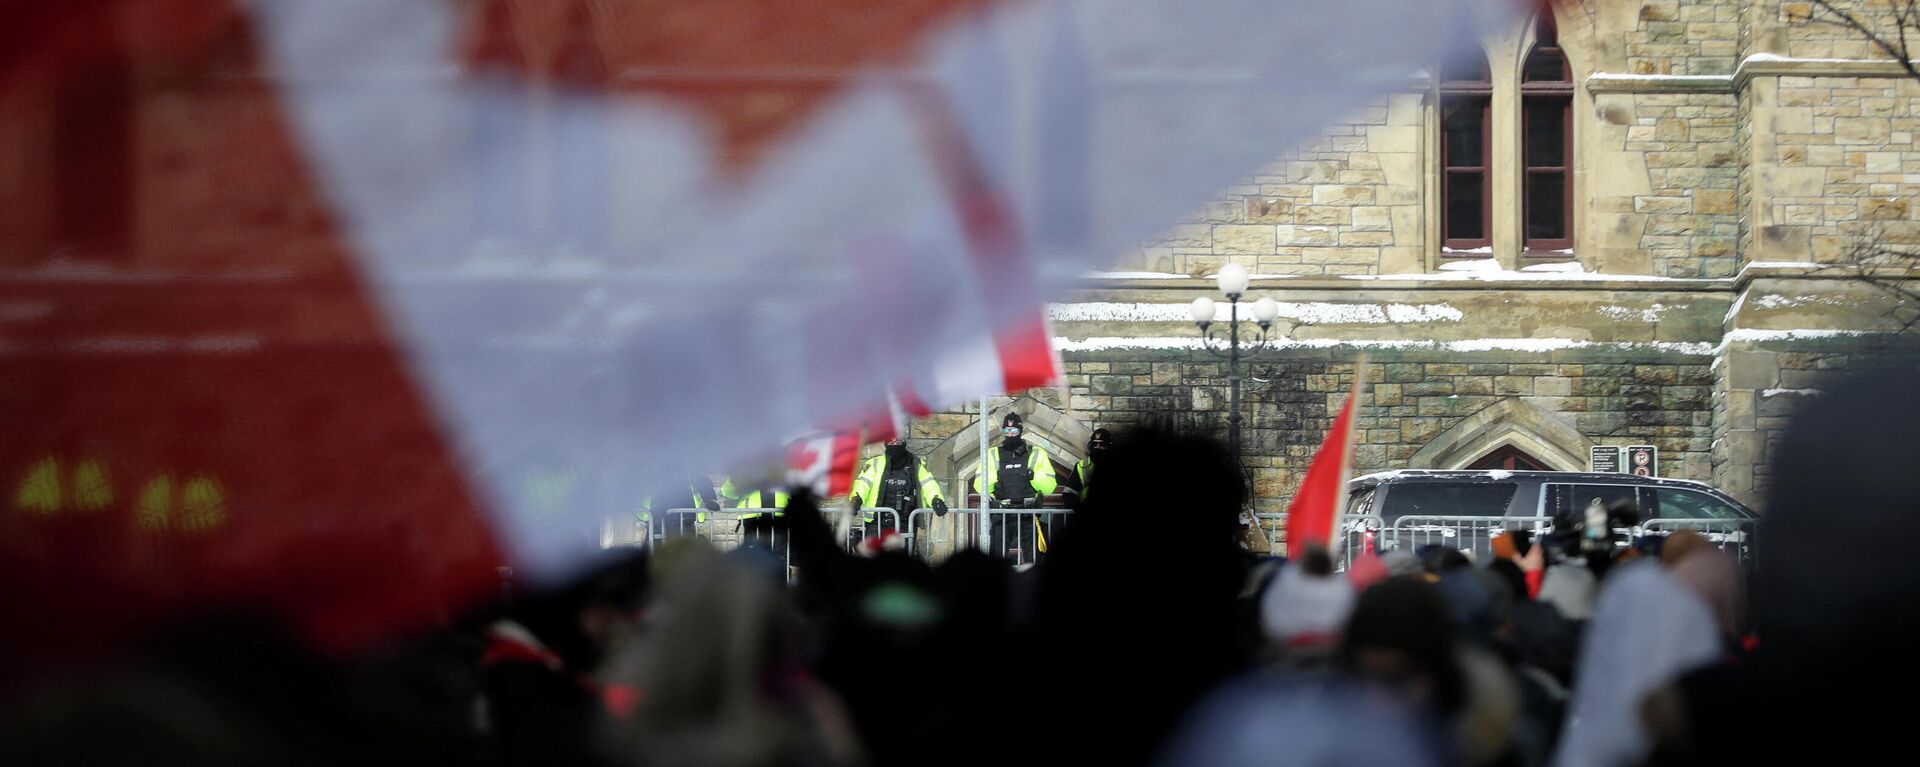 Canadian police officers watch while demonstrators hold Canadian flags, as they work to restore normality to the capital while trucks and demonstrators continue to occupy the downtown core for more than three weeks to protest against pandemic restrictions in Ottawa, Ontario, Canada, February 19, 2022.  REUTERS/Carlos Osorio - Sputnik International, 1920, 19.02.2022